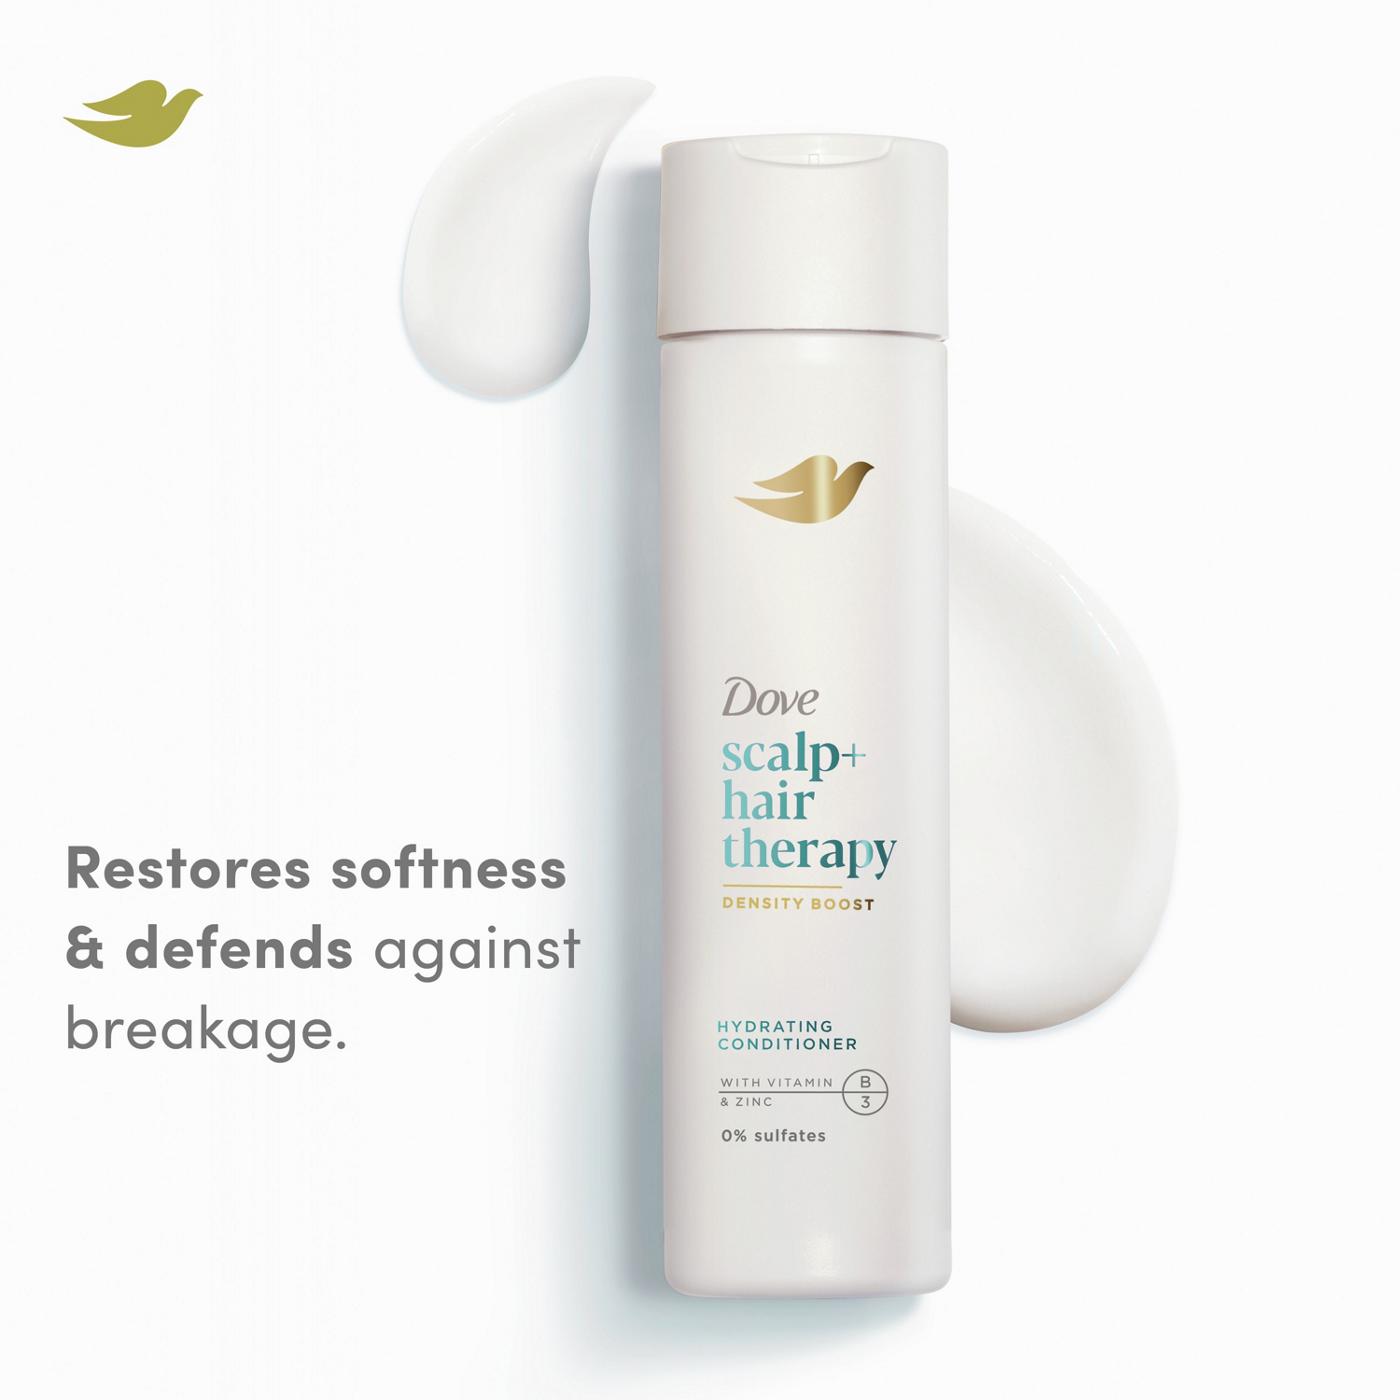 Dove Scalp+ Hair Therapy Hydrating Conditioner; image 3 of 4